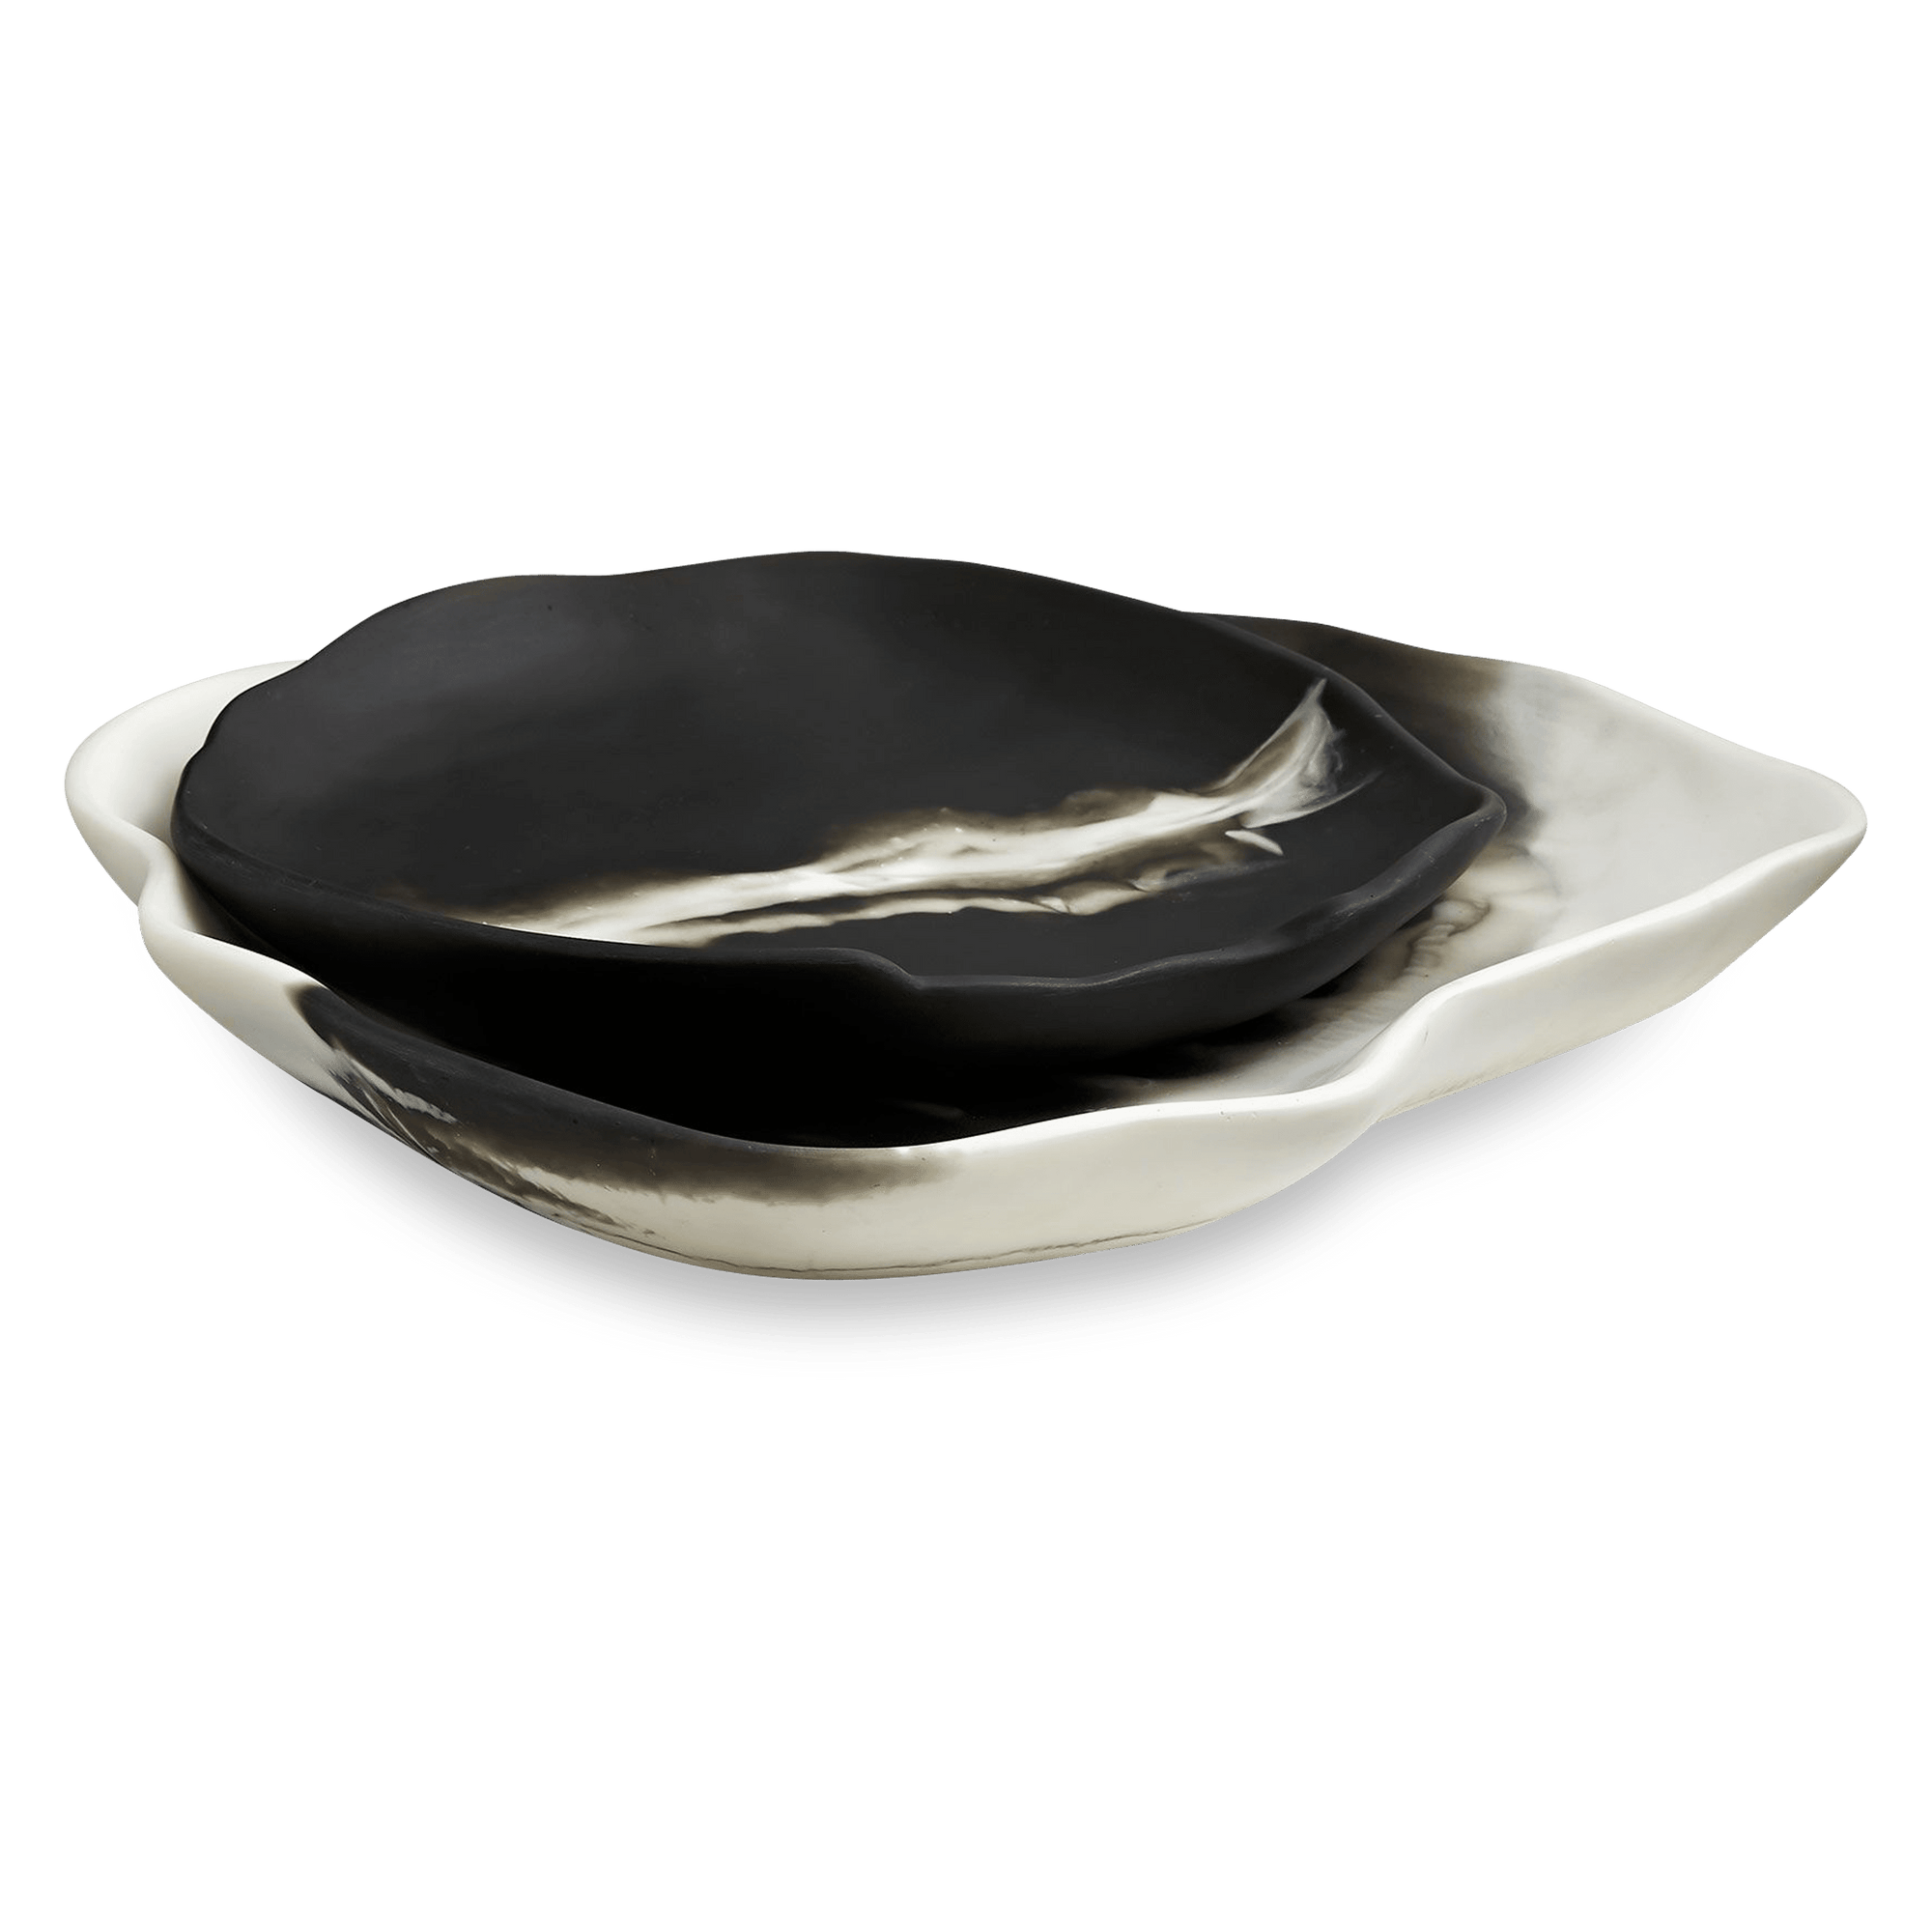 Explore the concept of yin and yang in this duo of trays.